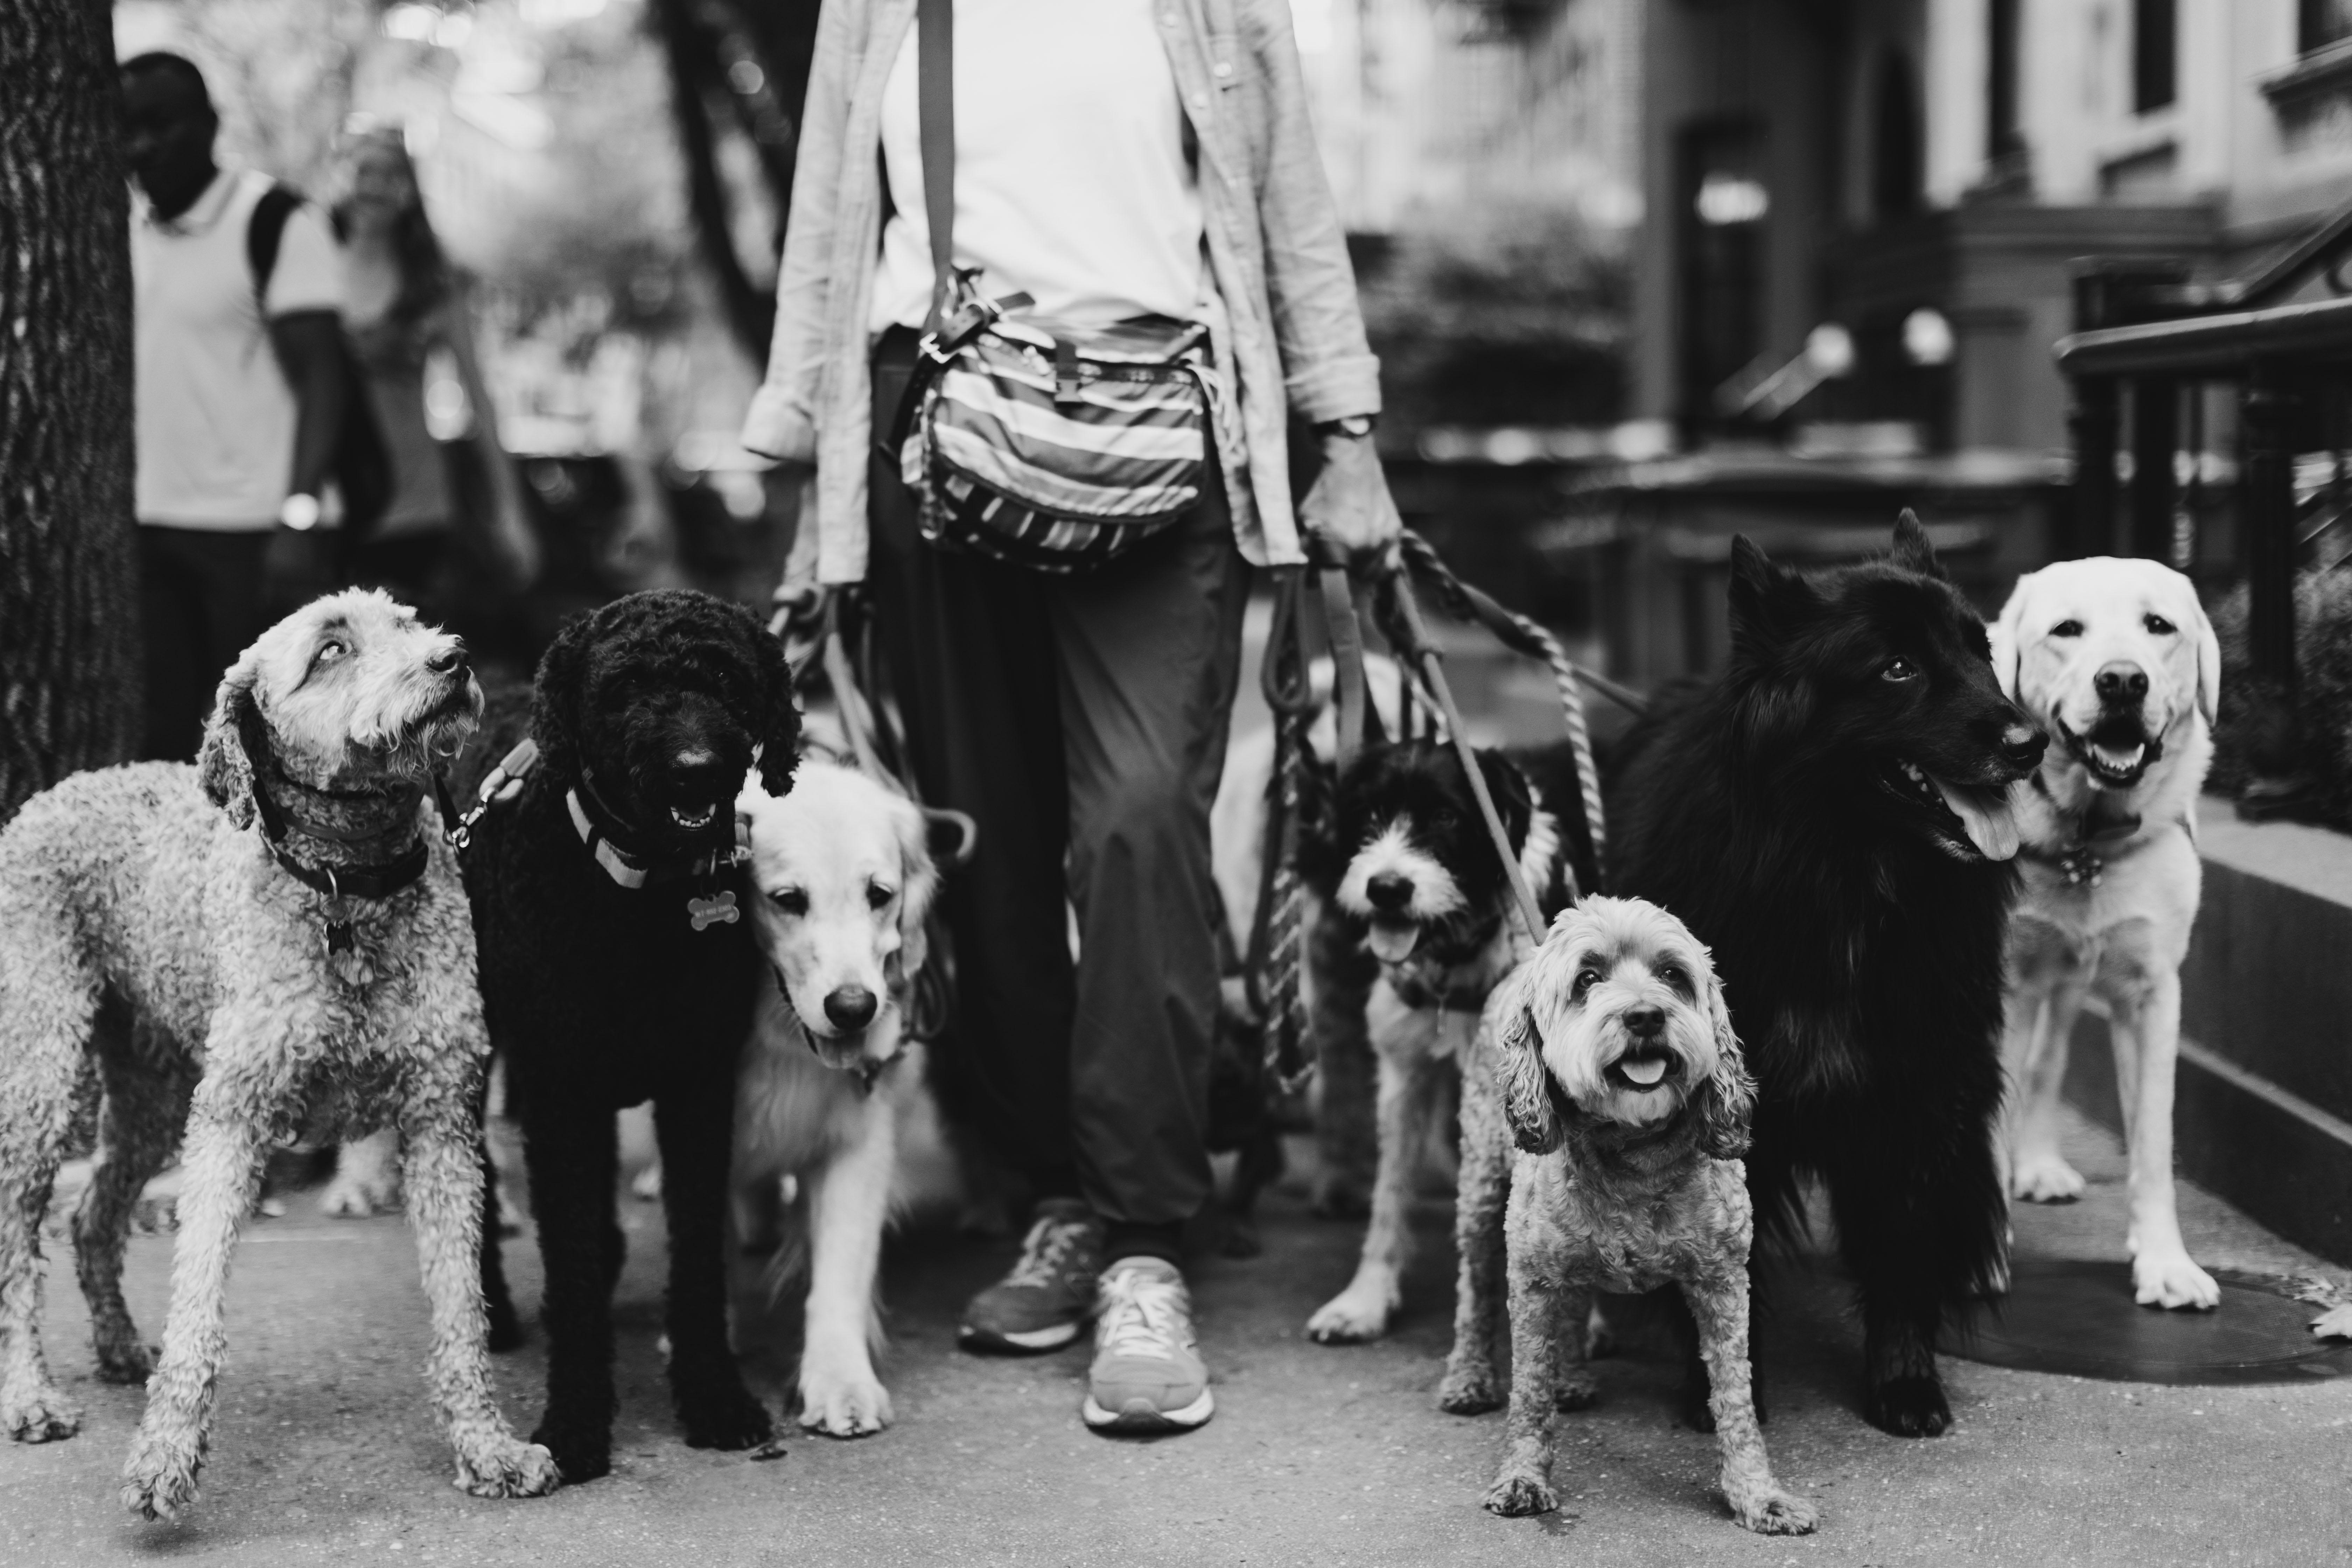 Addison Jones Black and White Photograph - Limited Edition, Animal Pictures, New York Street Photography-The Dog Walker 911